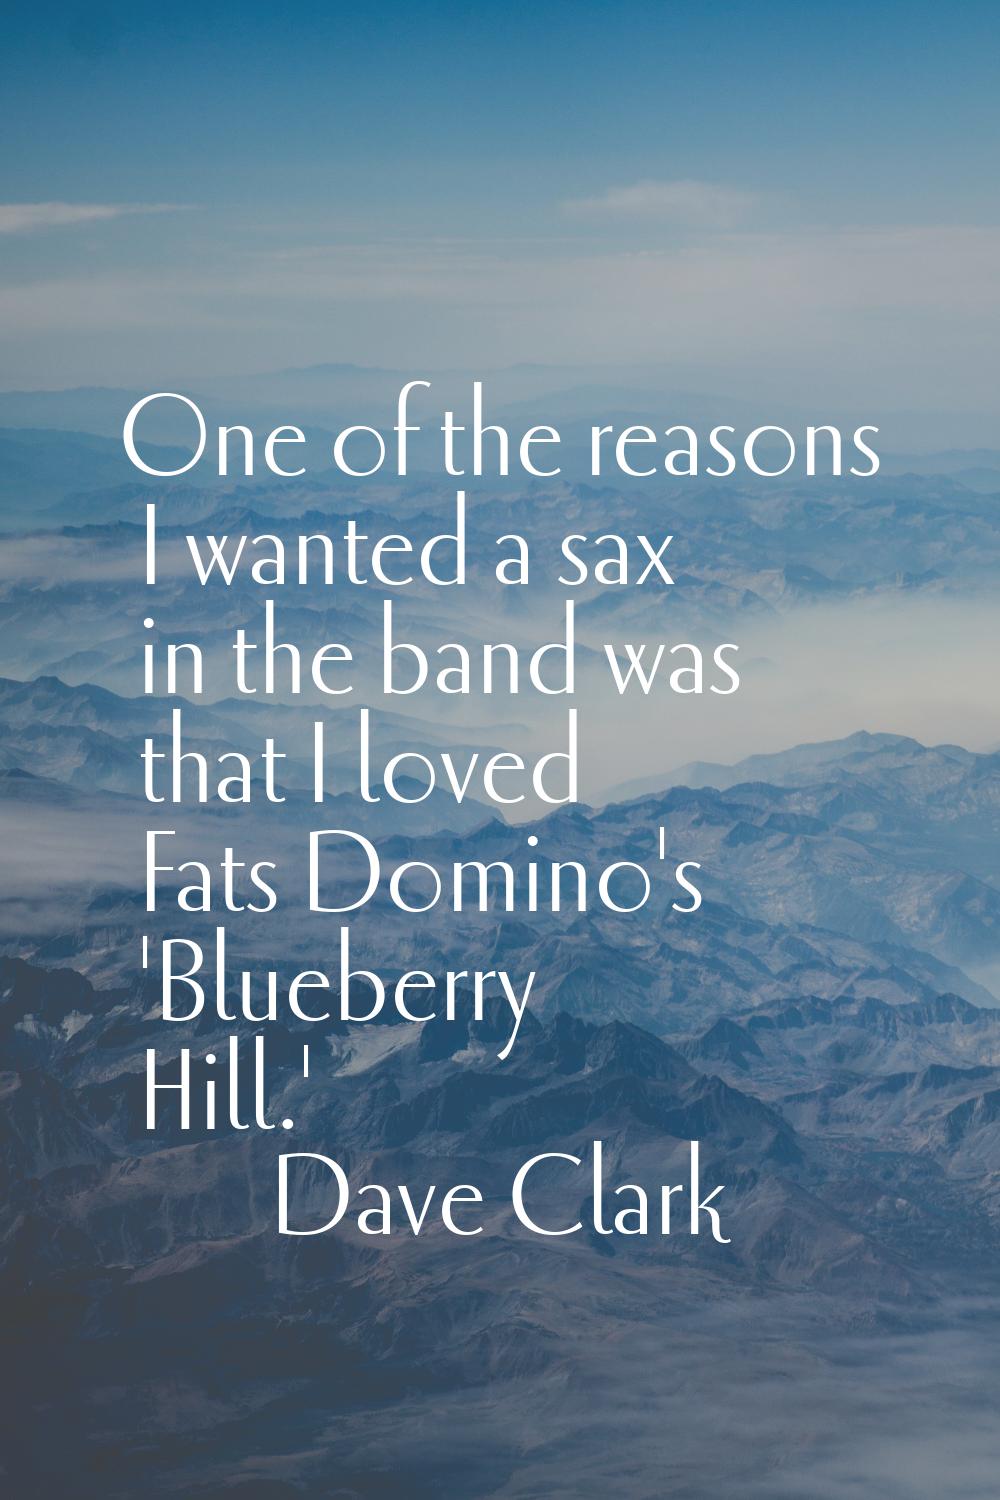 One of the reasons I wanted a sax in the band was that I loved Fats Domino's 'Blueberry Hill.'